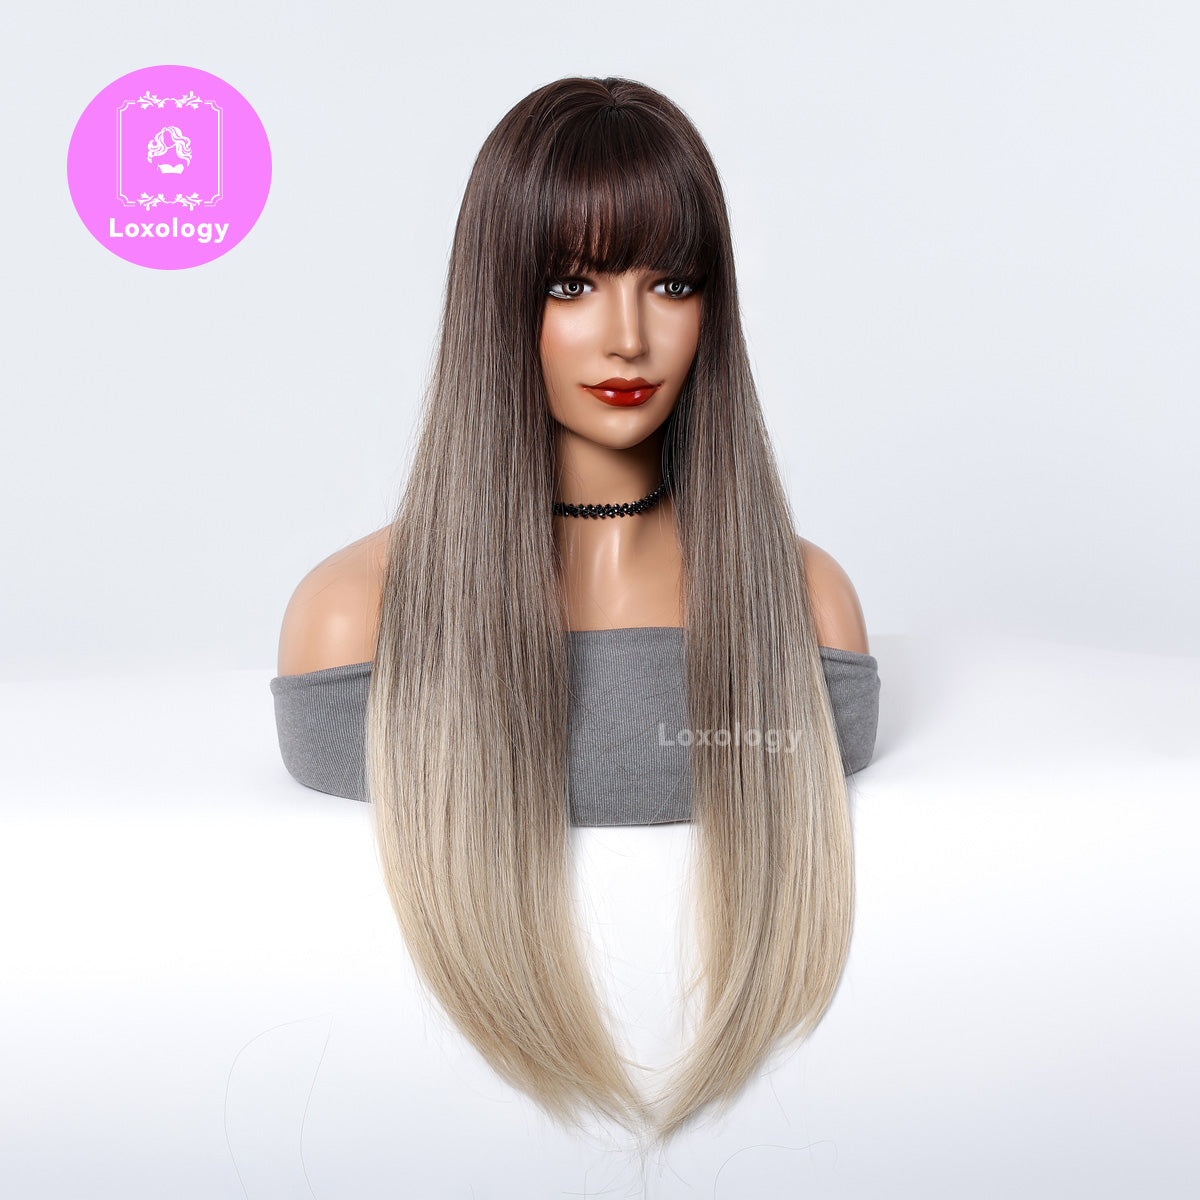 【Elise】Loxology | 26inch Long straight wigs black ombre blonde with bangs wig